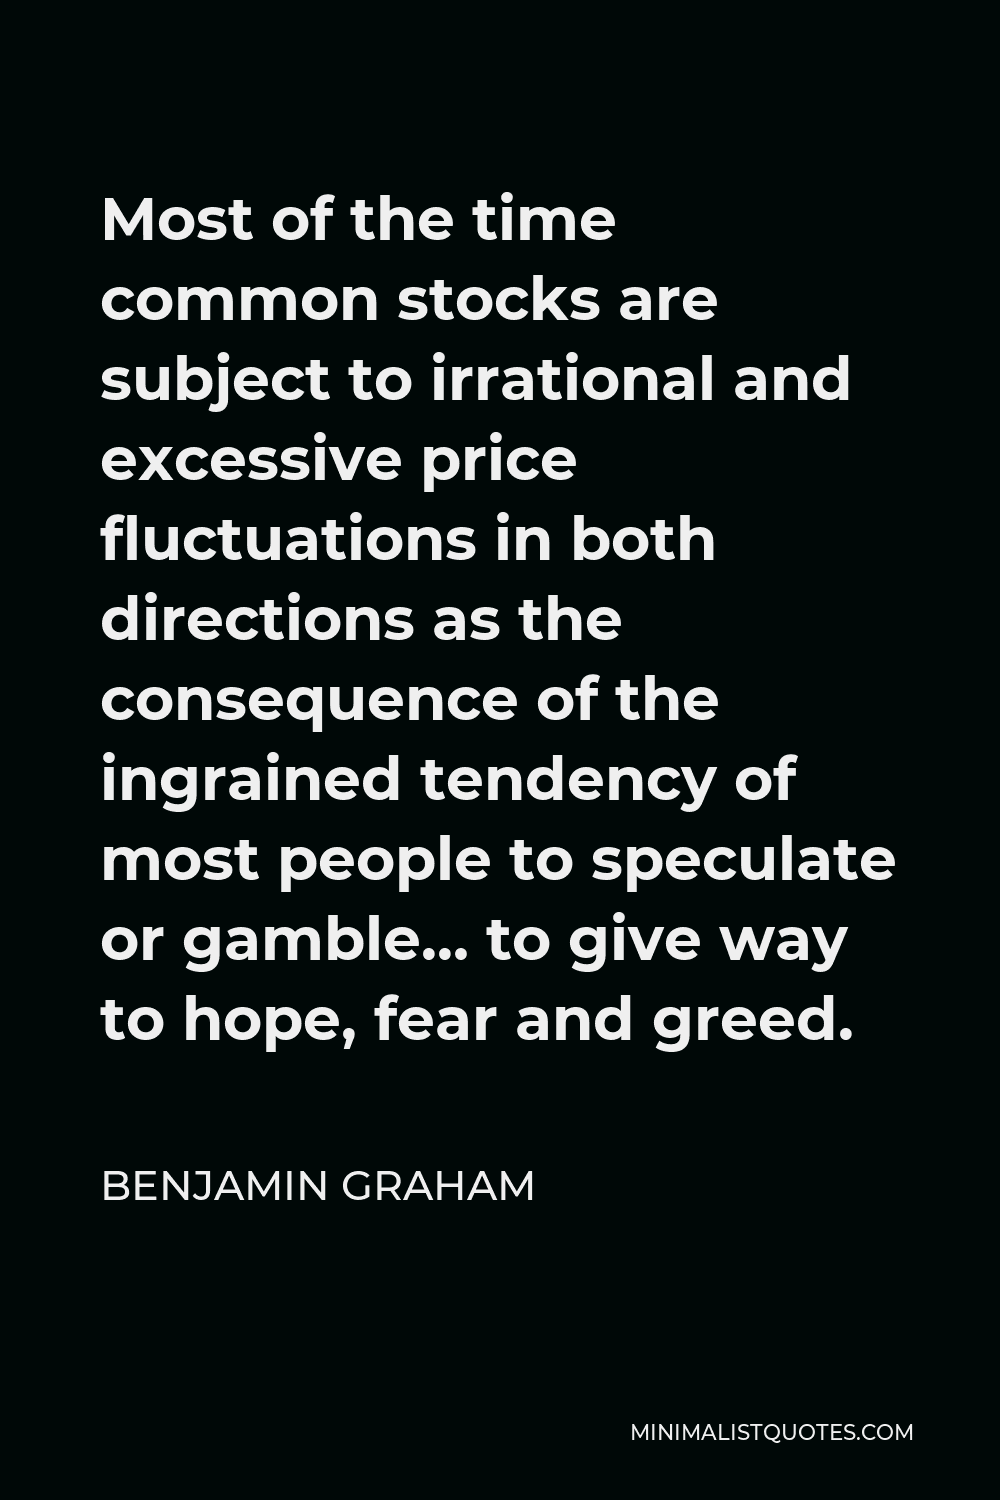 Benjamin Graham Quote - Most of the time common stocks are subject to irrational and excessive price fluctuations in both directions as the consequence of the ingrained tendency of most people to speculate or gamble… to give way to hope, fear and greed.